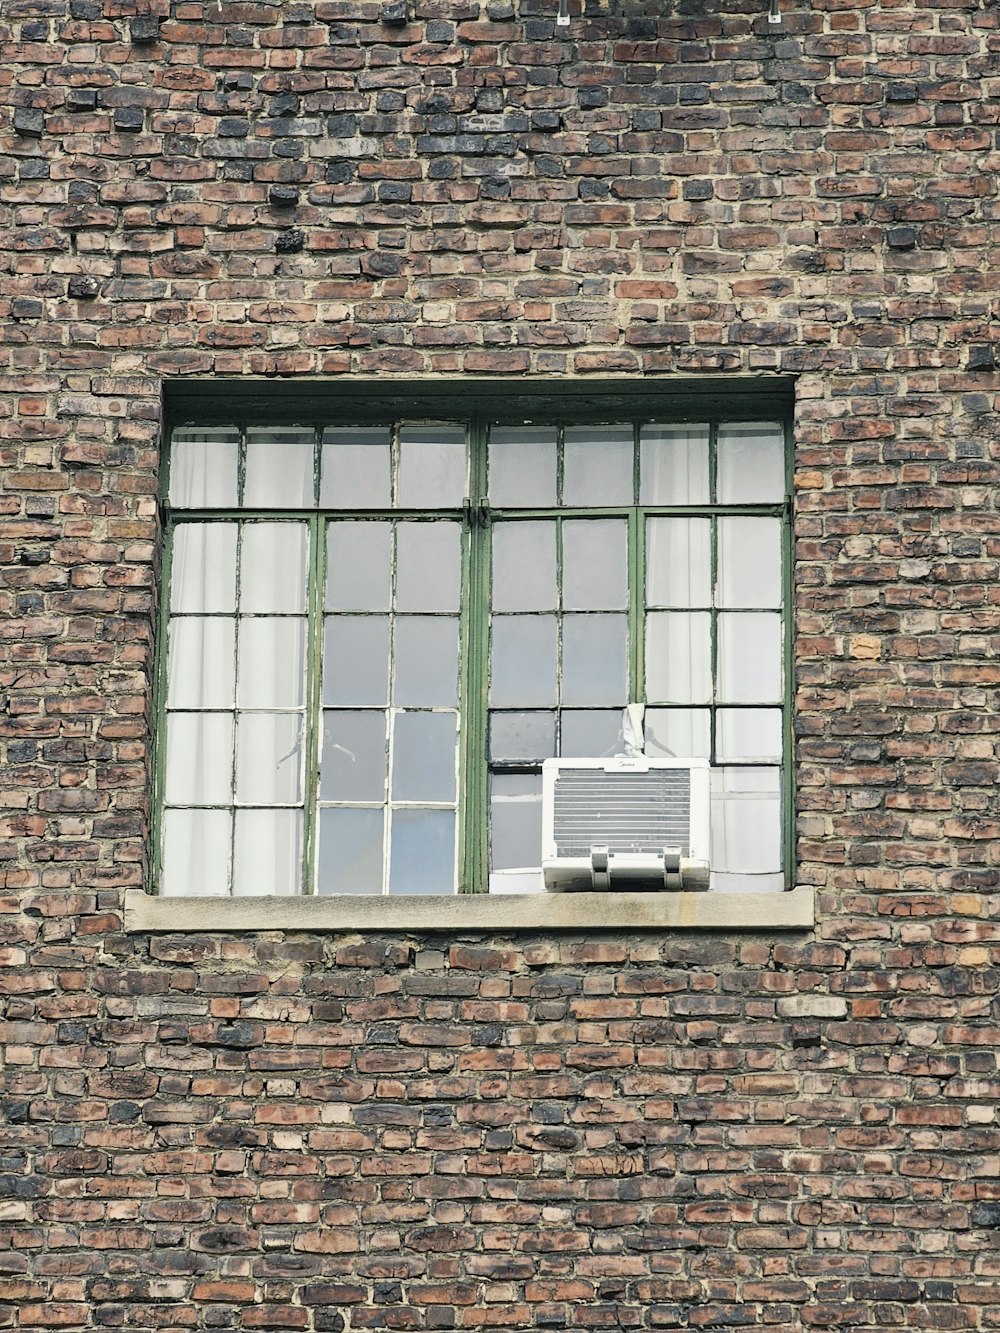 a brick building with a window and air conditioner